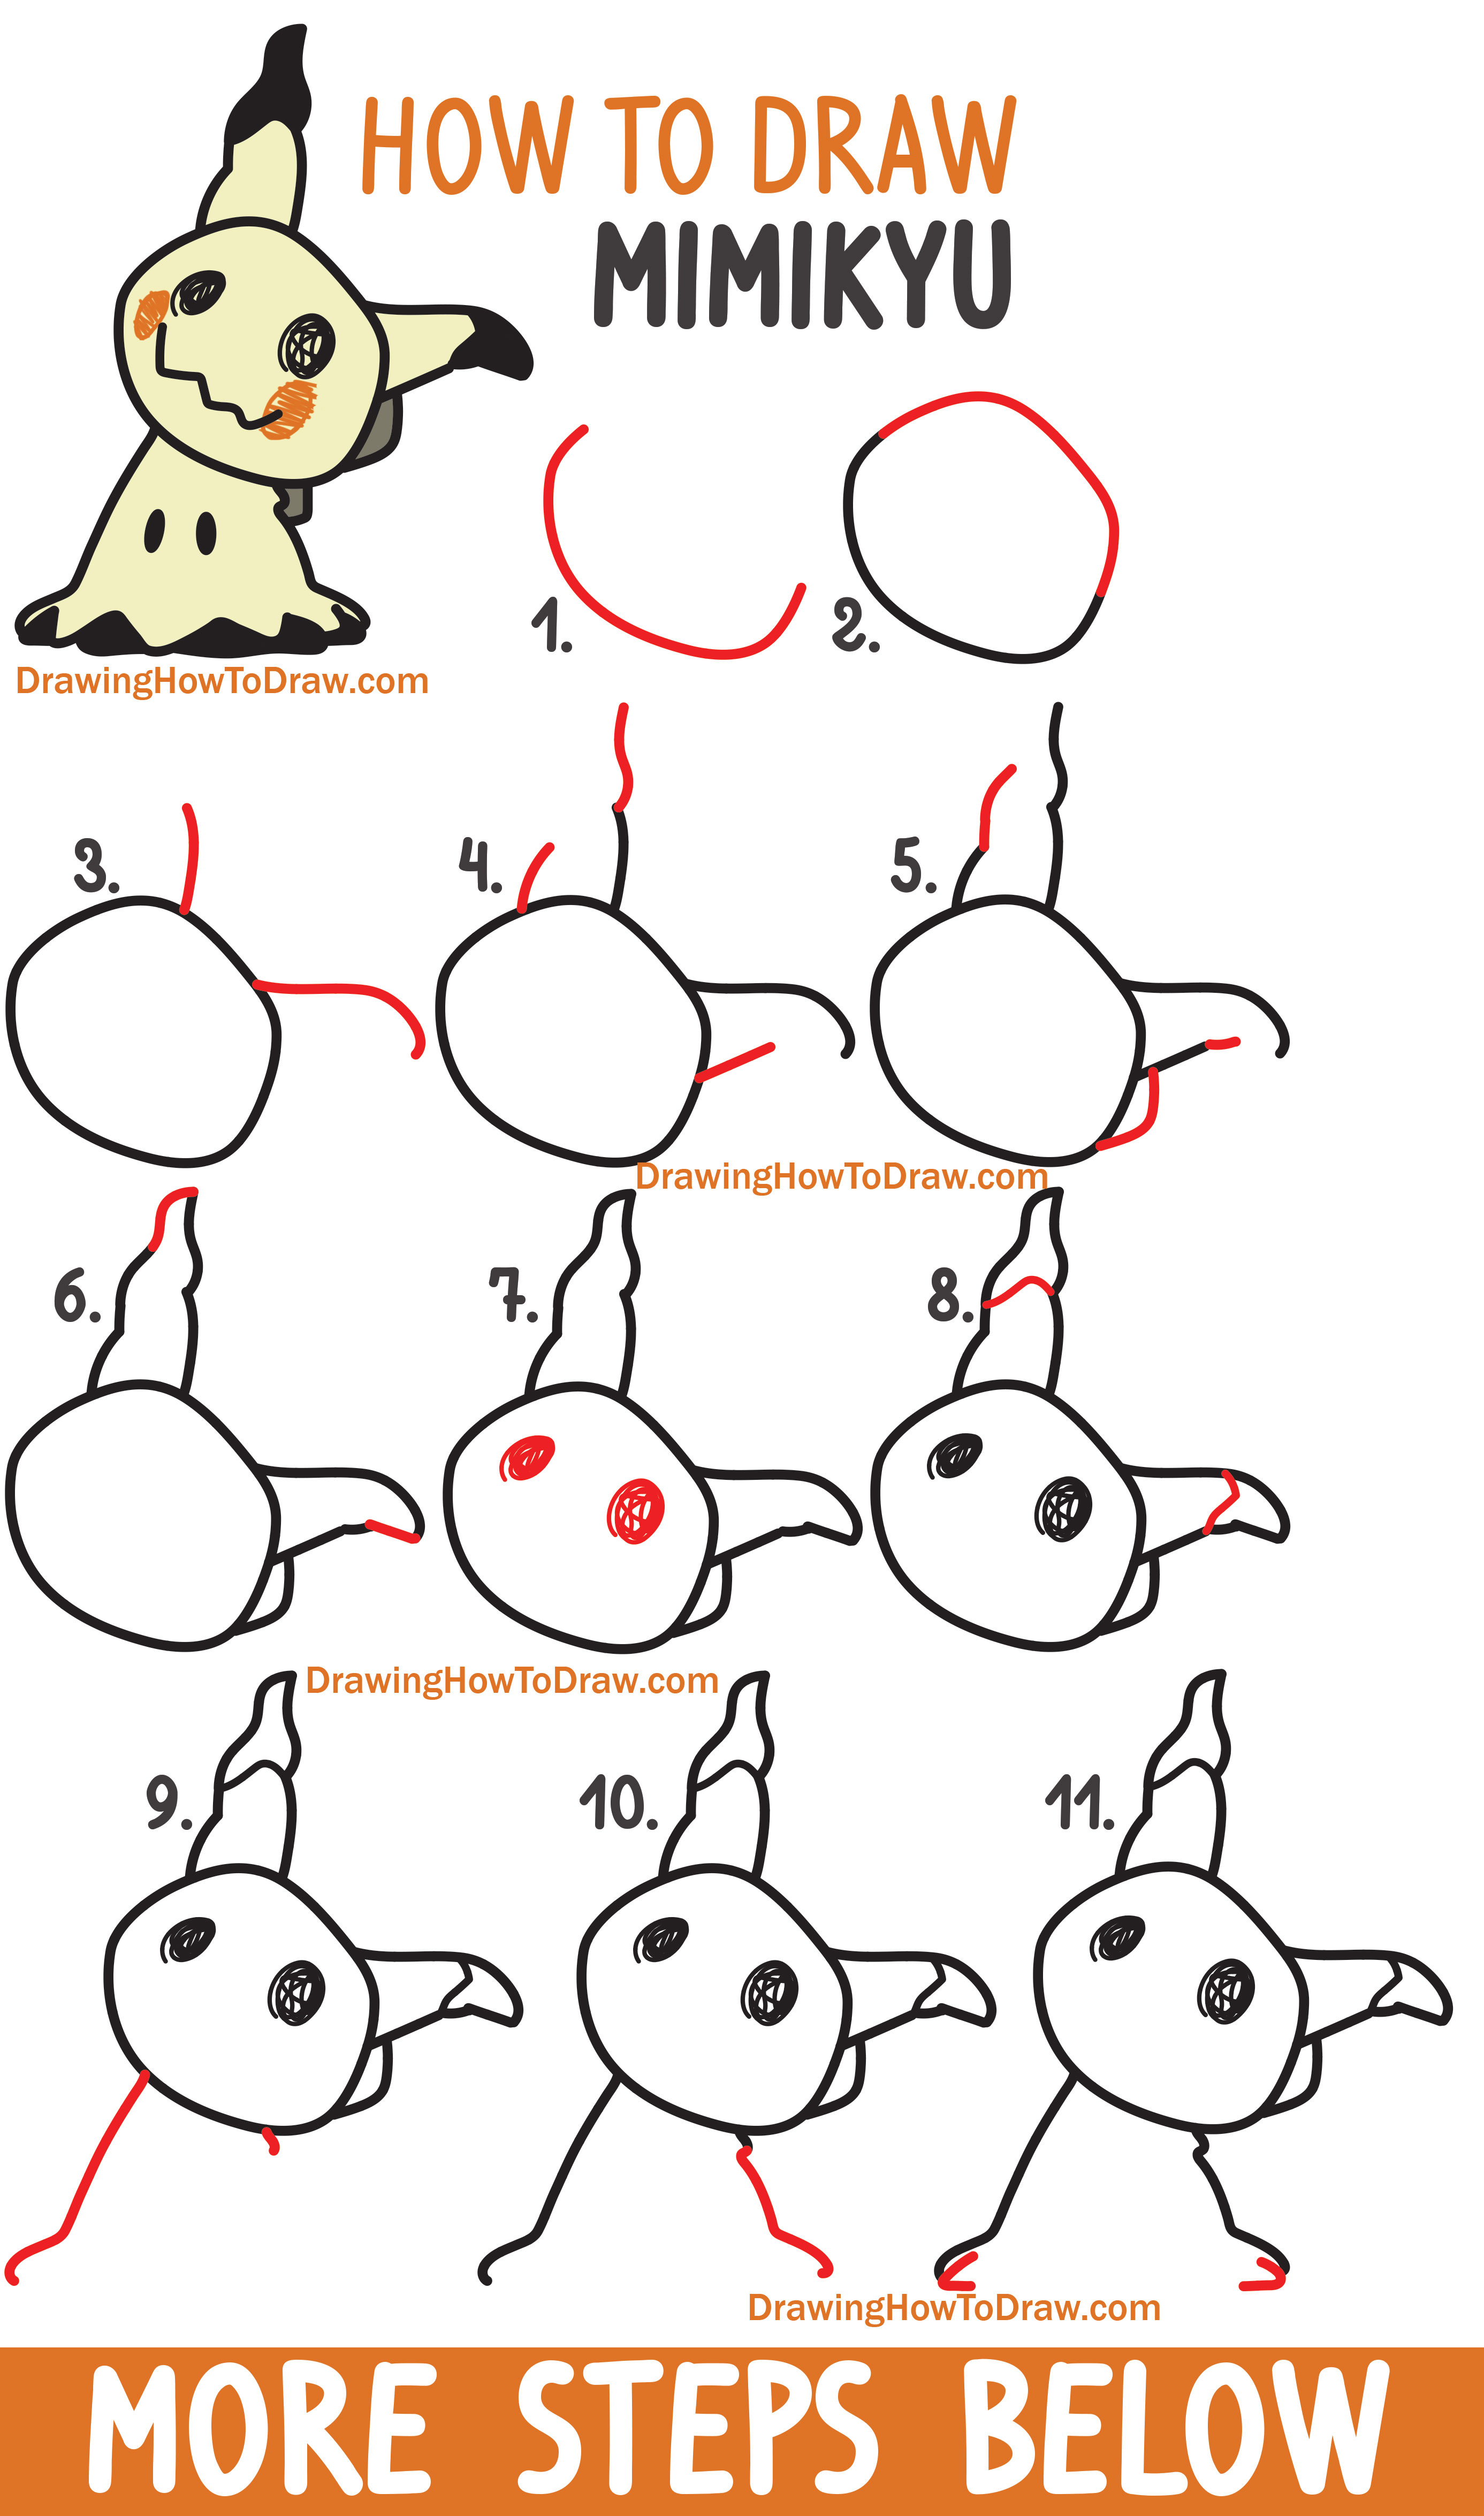 Learn How to Draw Mimikyu from Pokemon Easy Step by Step Drawing Lesson for Beginners